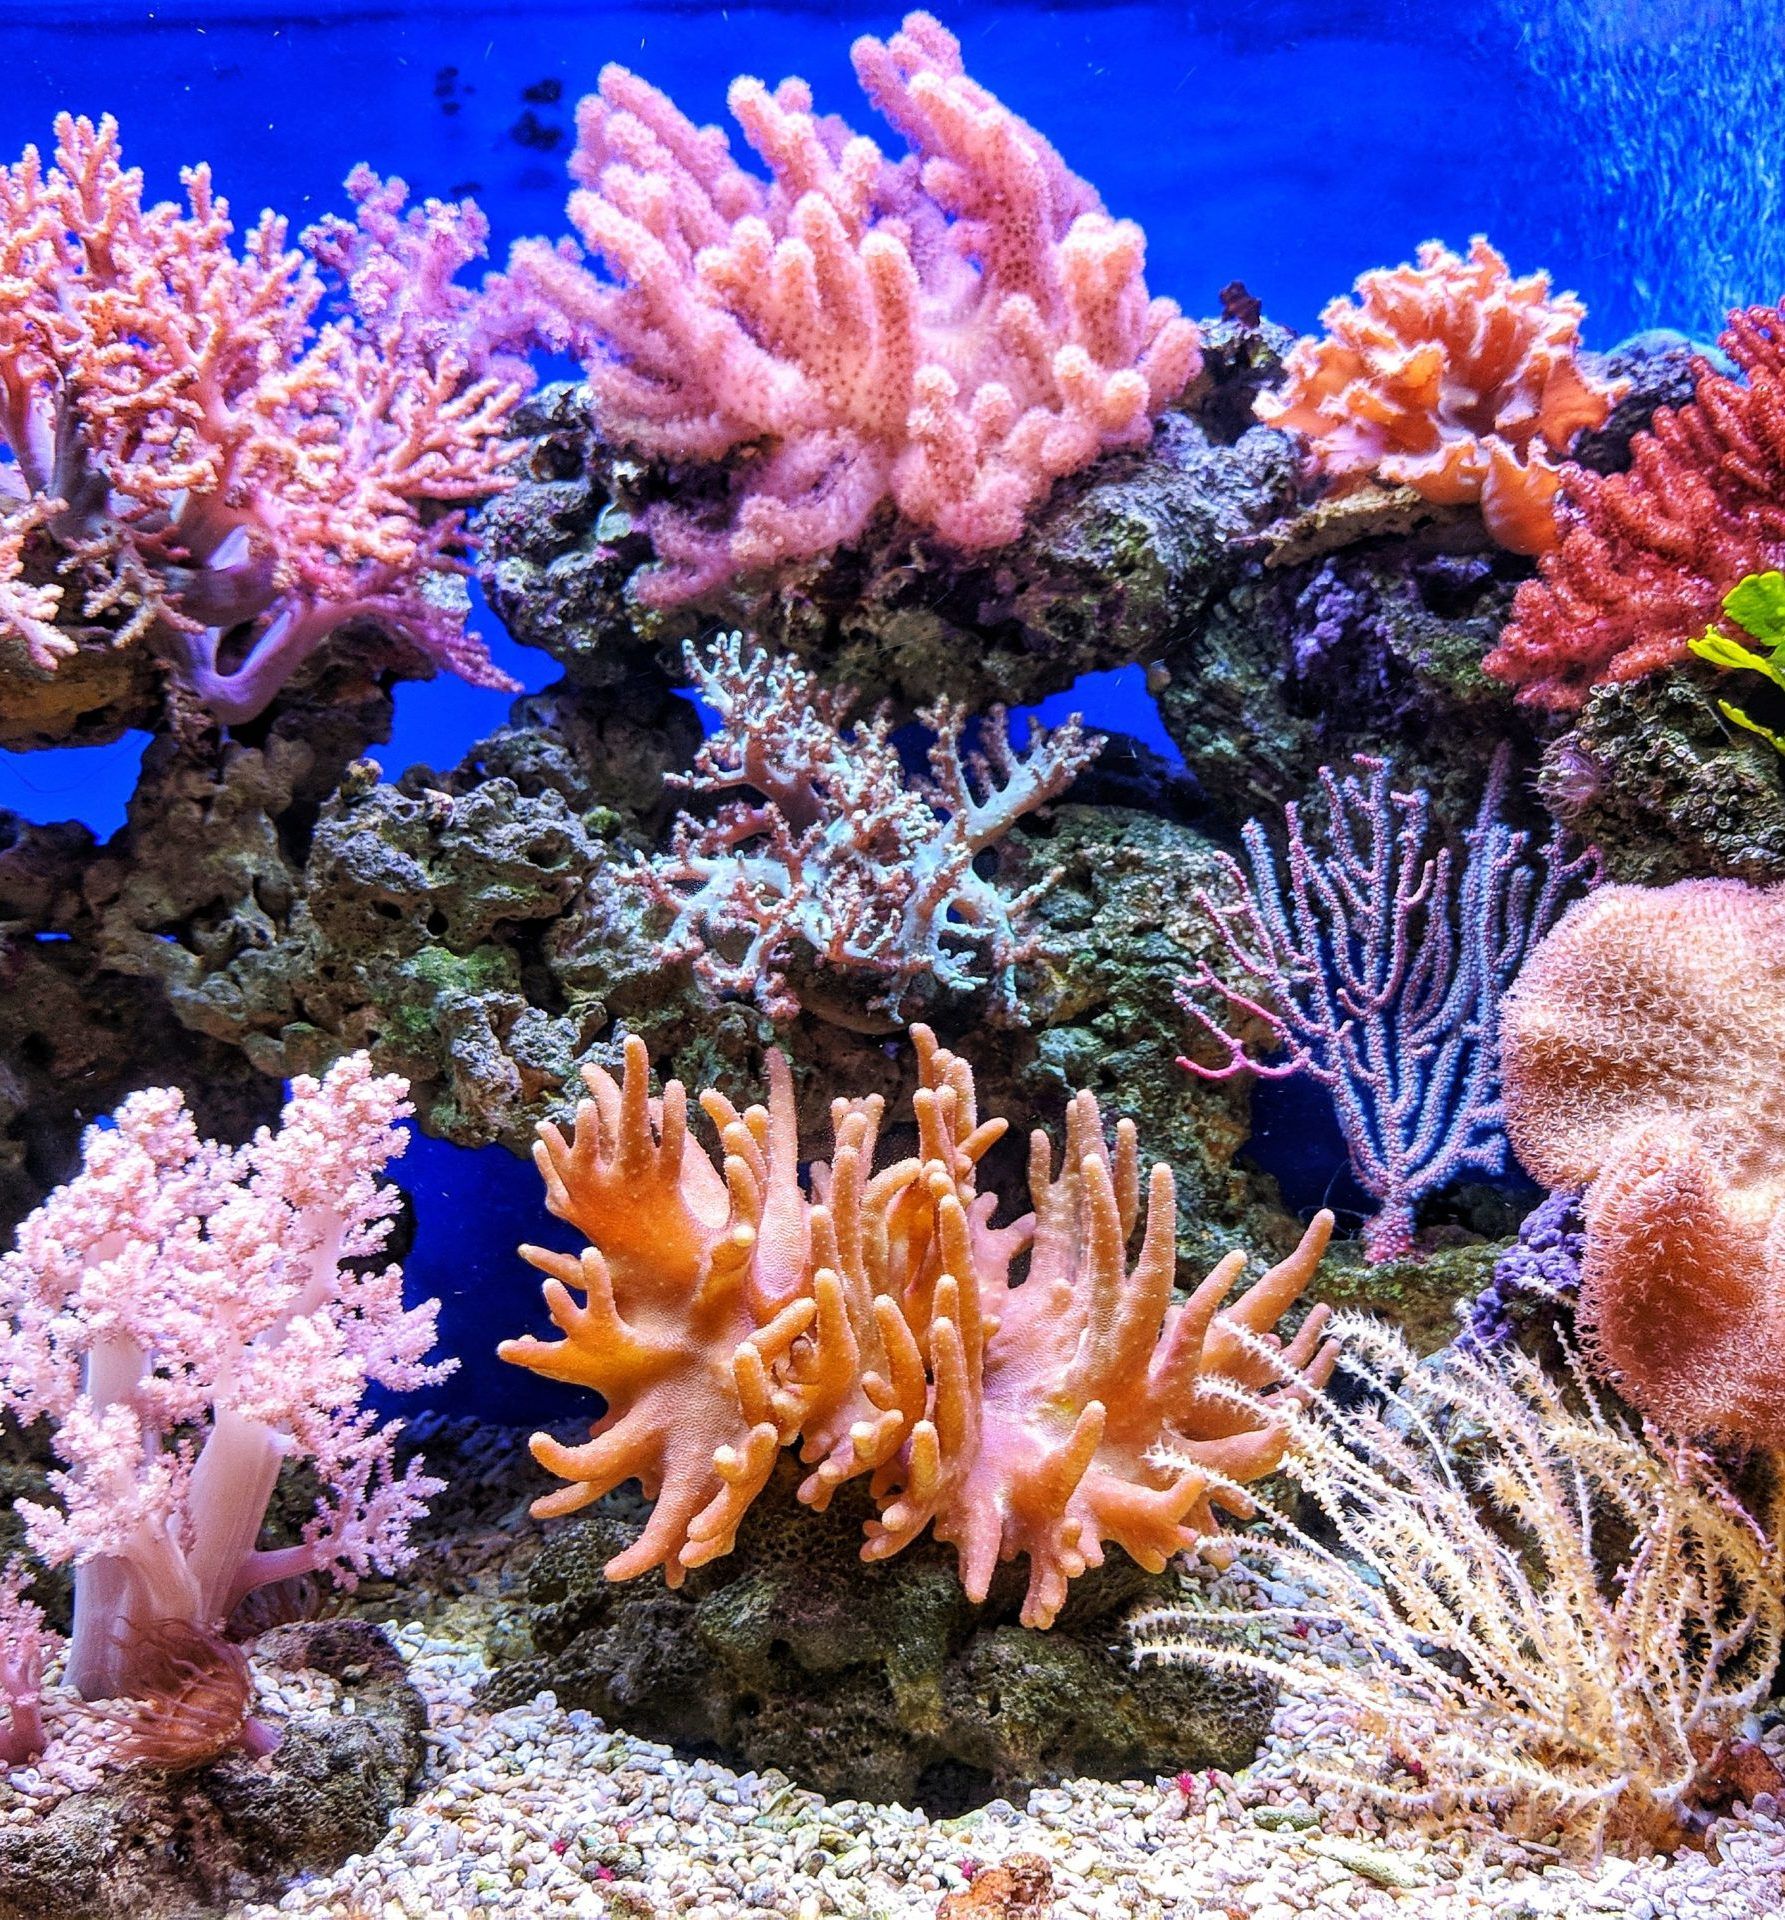 Are Corals Plants, Animals, or Something Else Entirely? Funny Little Site